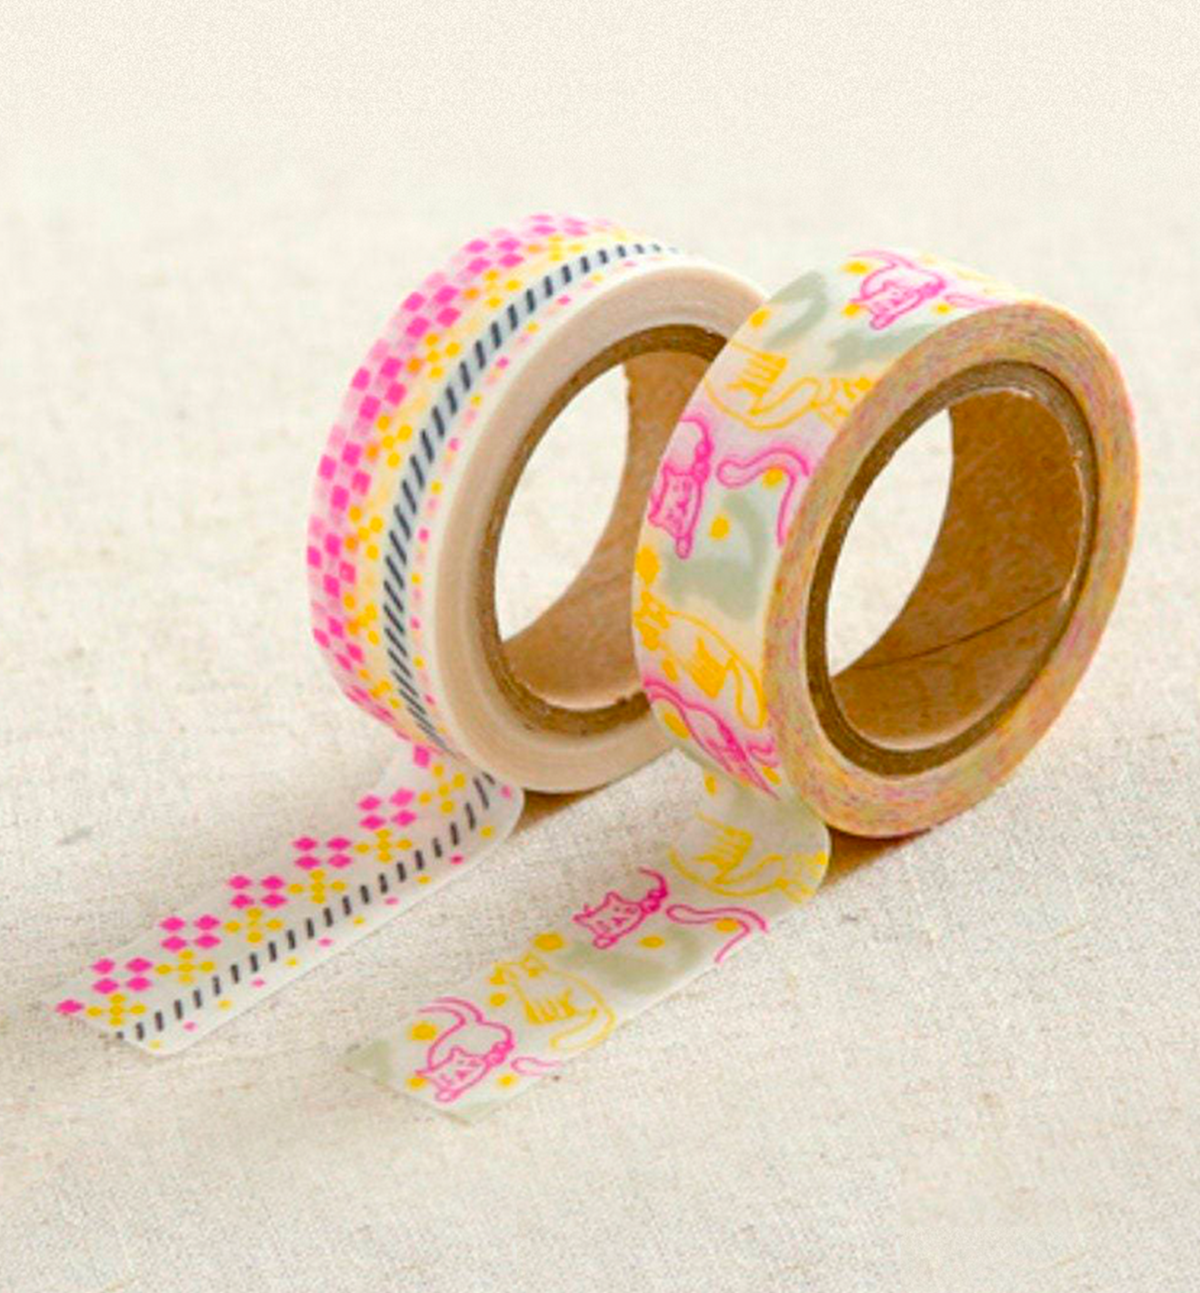 2 Afternoon Washi Tape